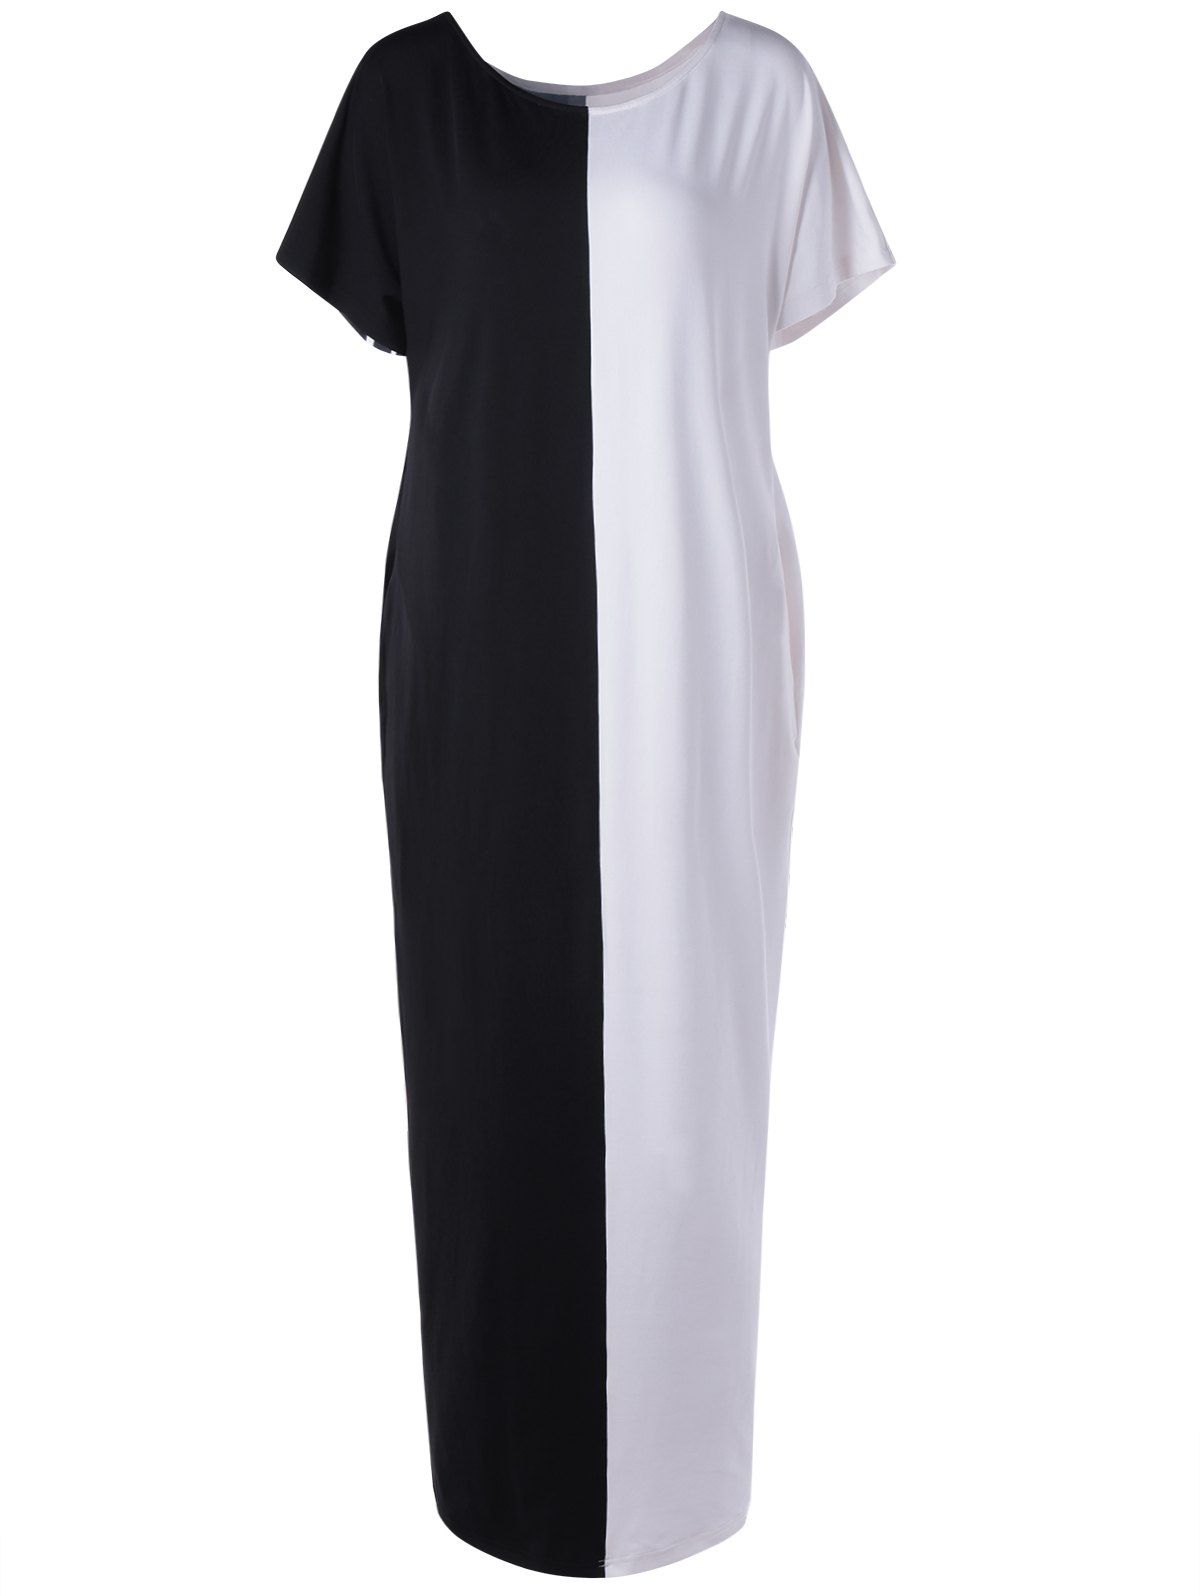 white and black color block dress